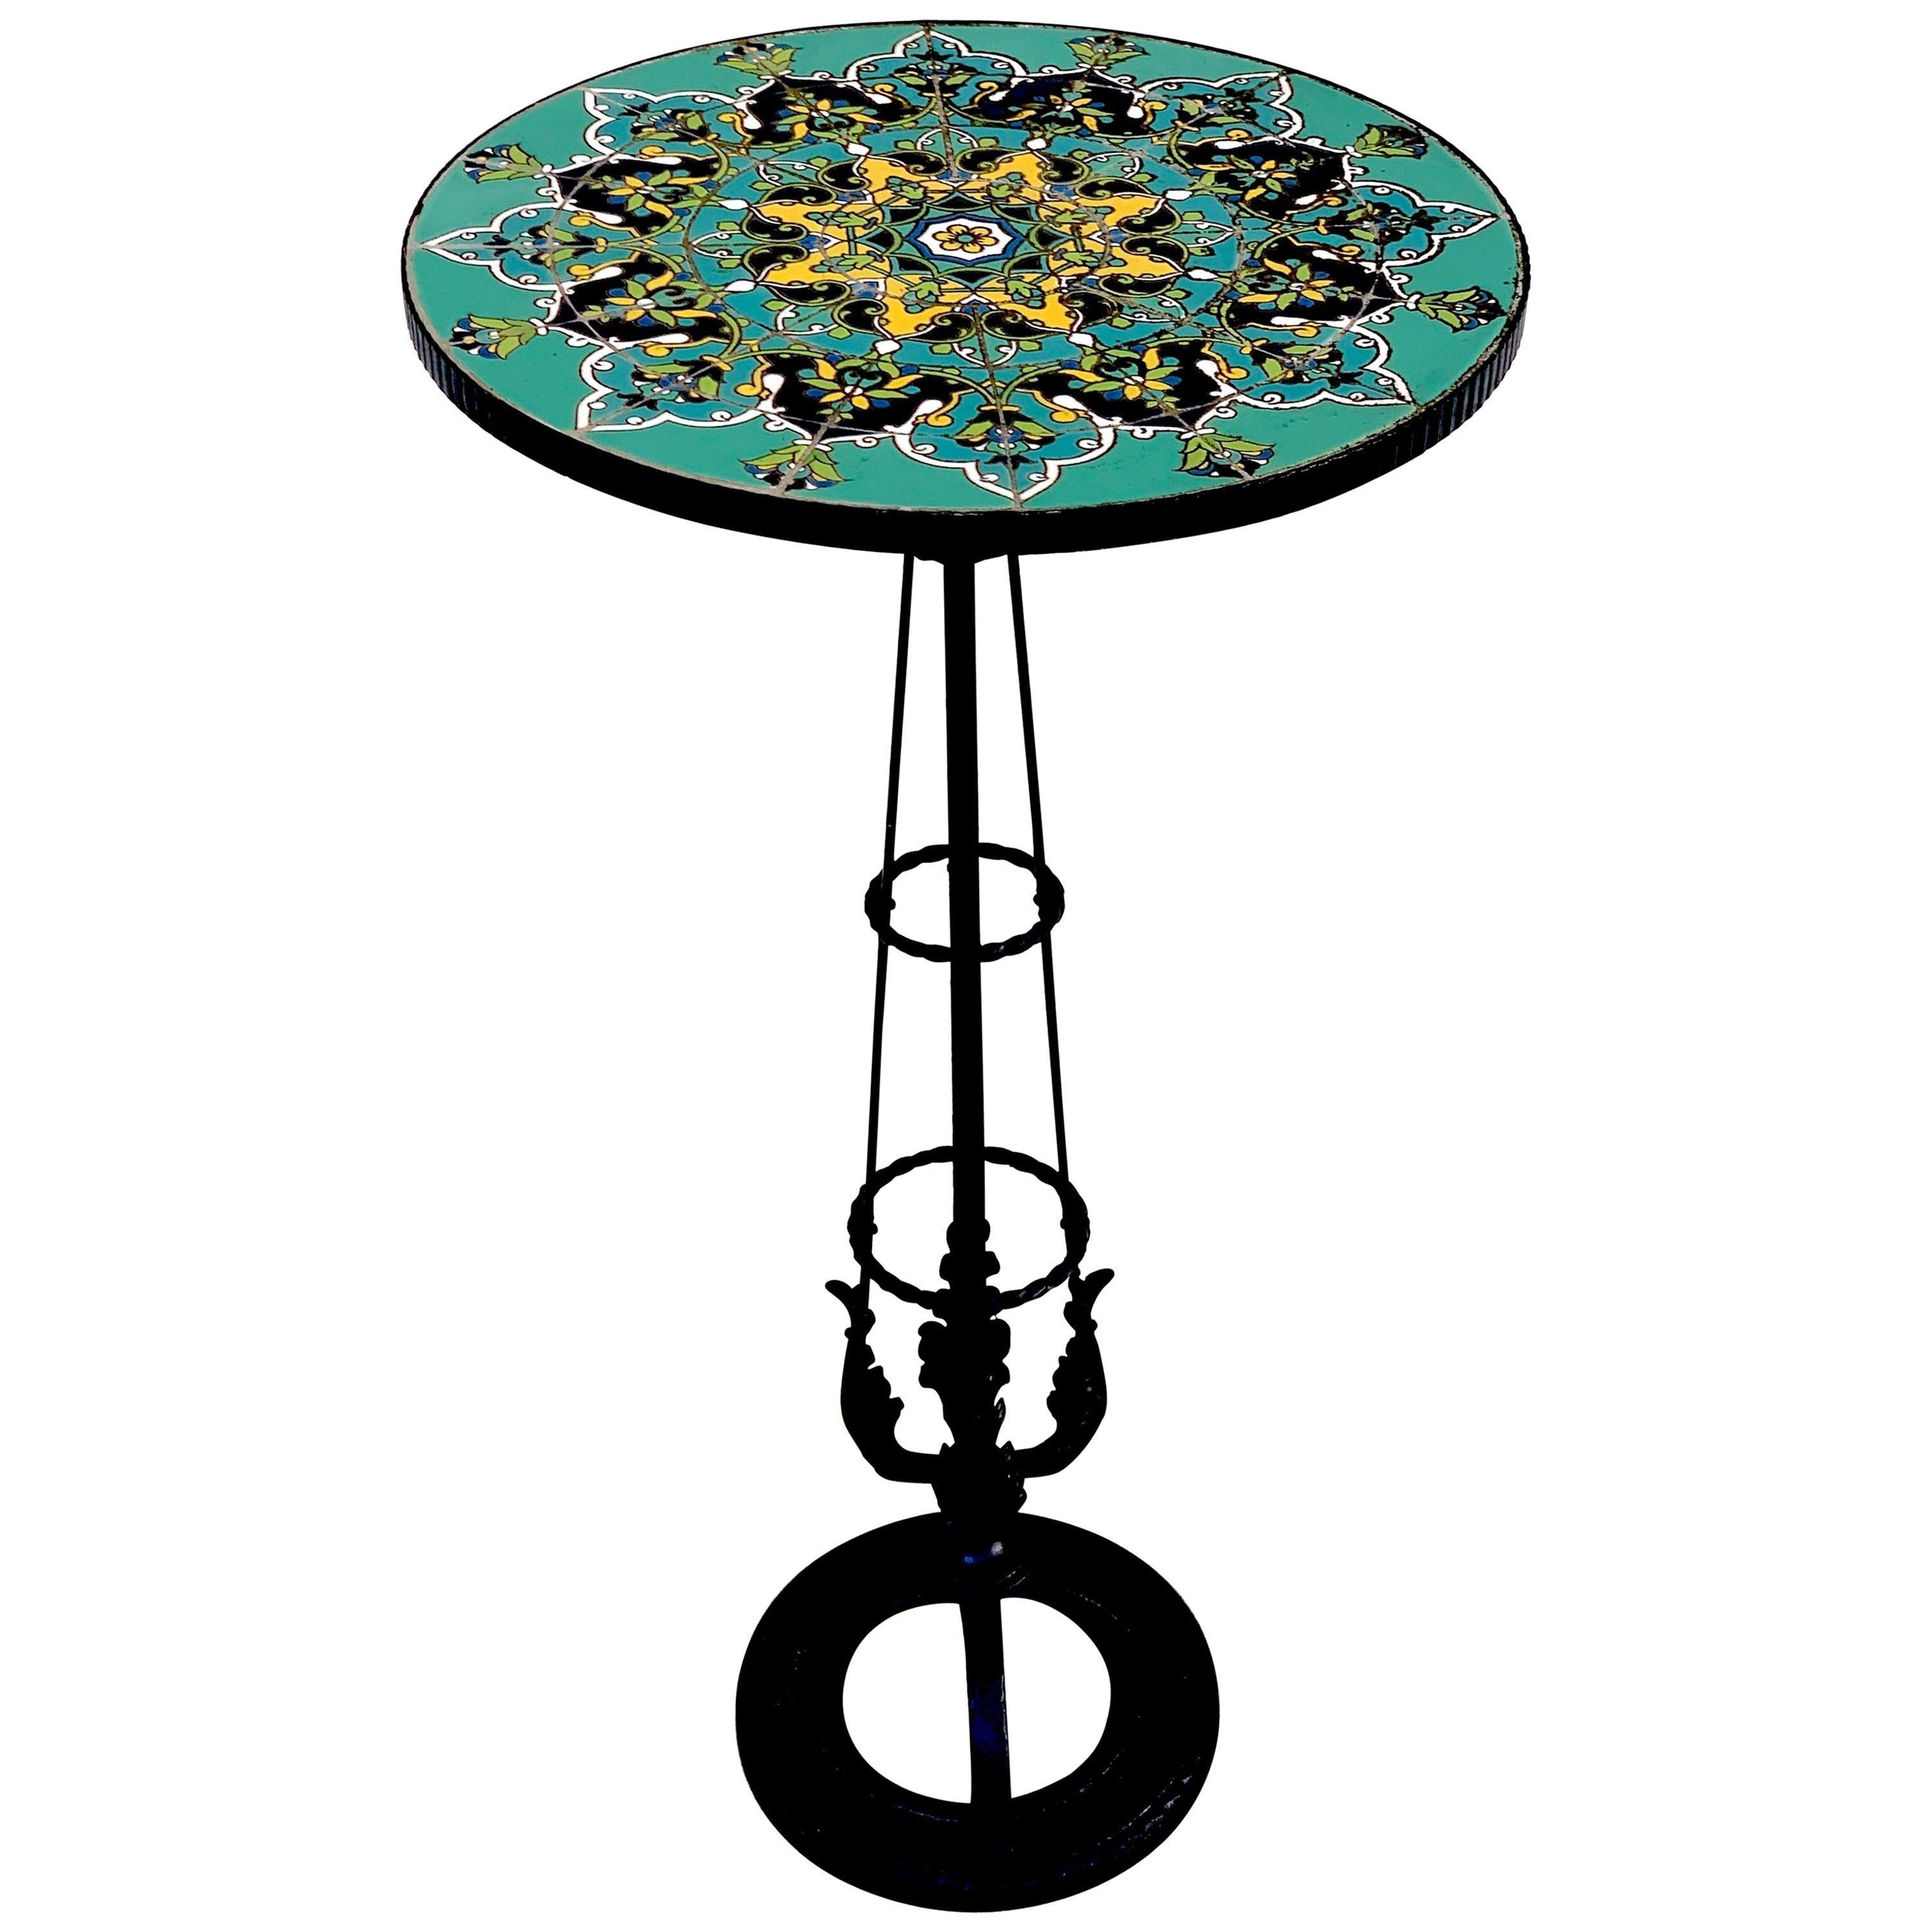 French Art Deco Turquoise Tile and Wrought Iron Pedestal Table For Sale